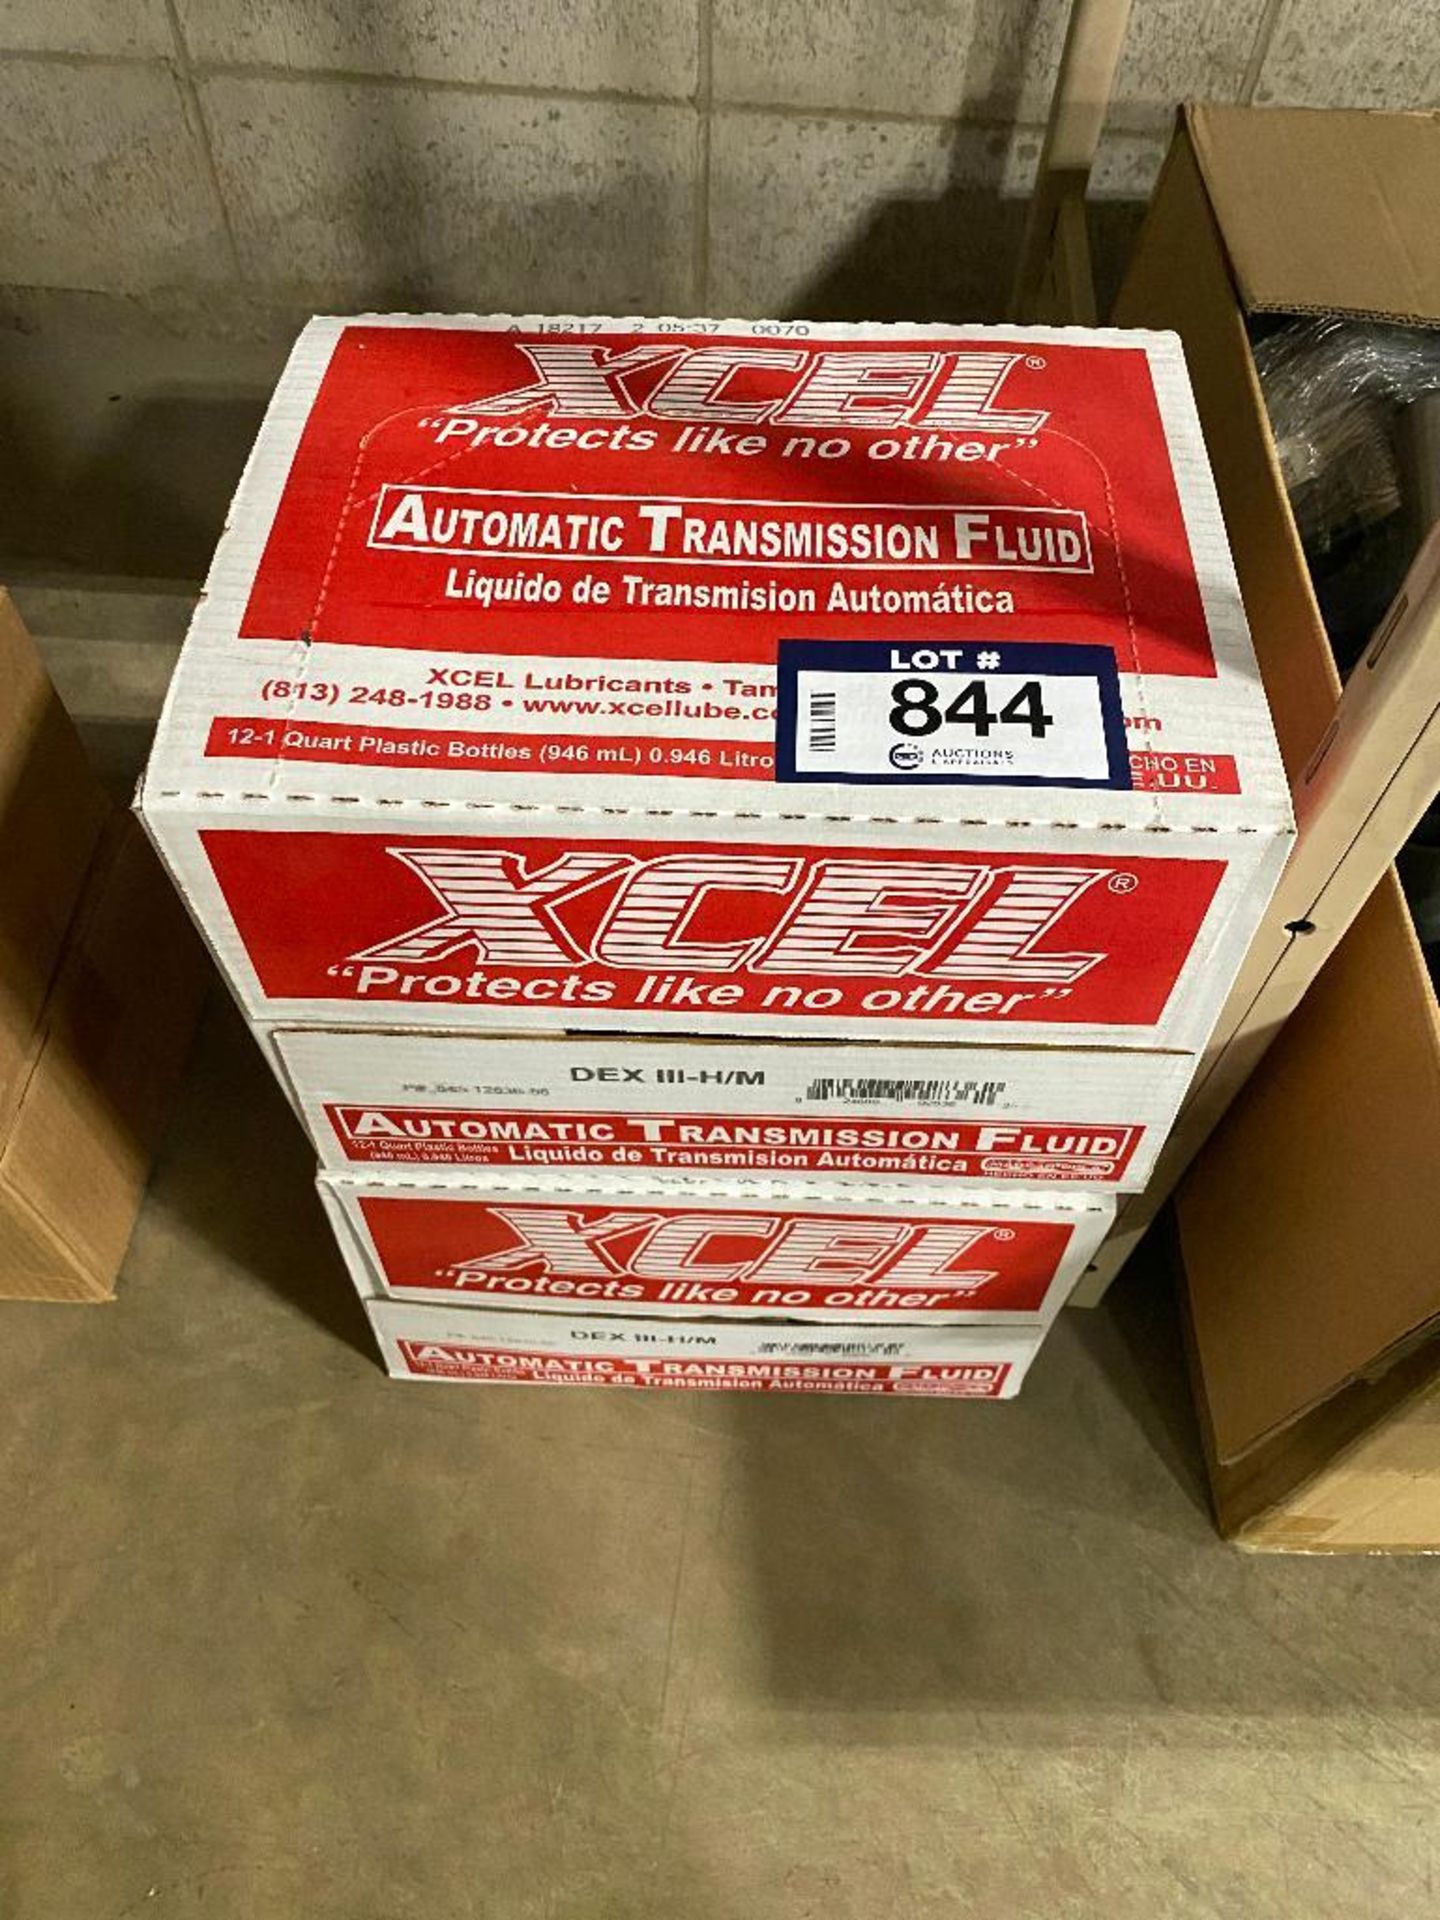 Lot of (2) Cases of XCEL DEXIII-H/M ATF Fluid - Image 2 of 2